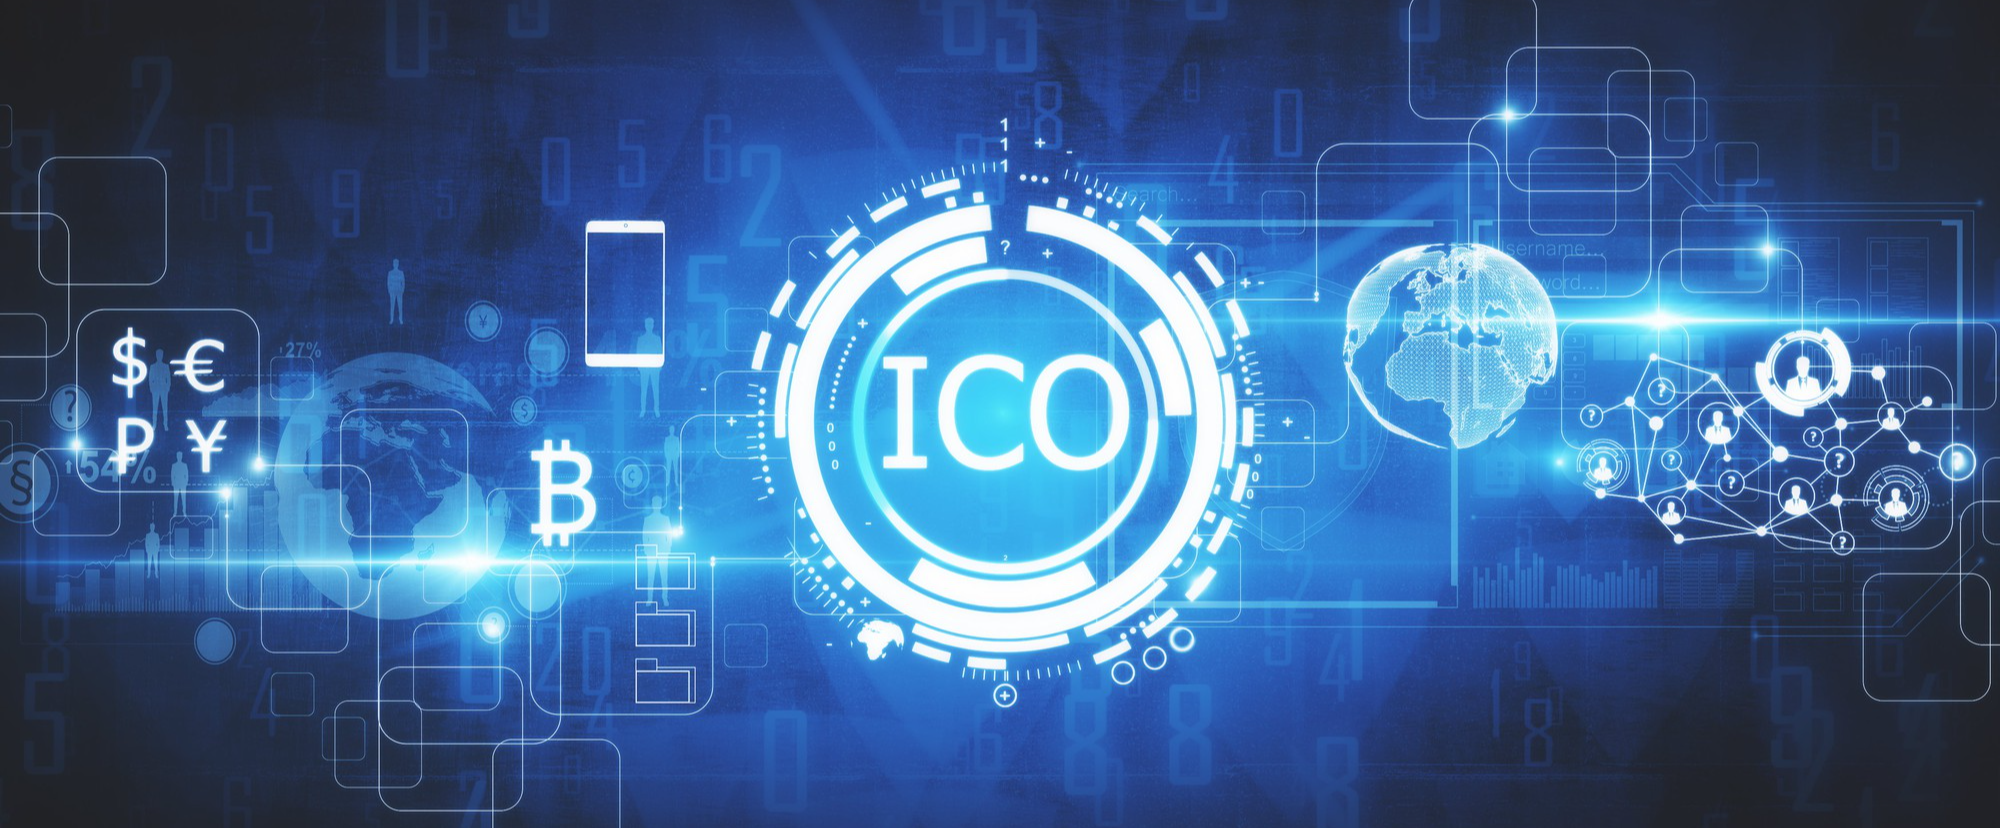 We give a breakdown of what an ICO is